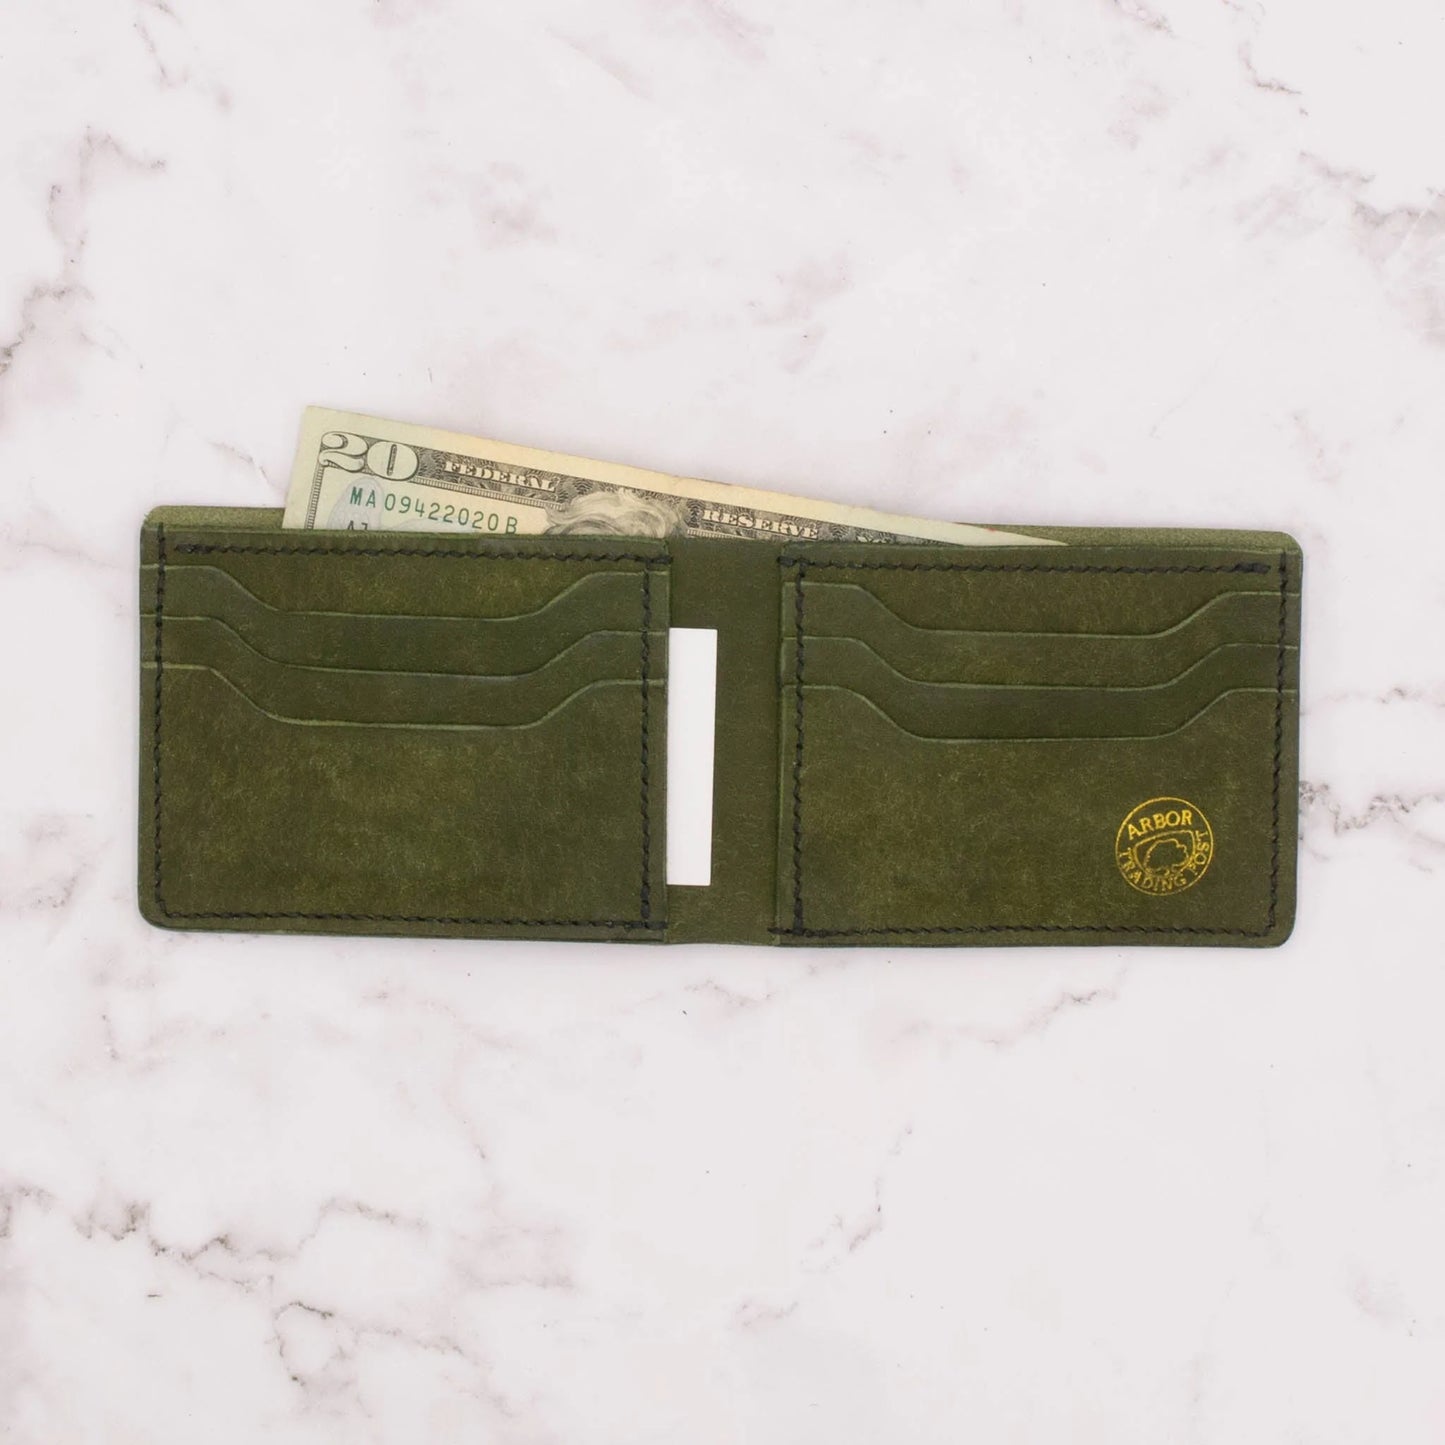 Arbor Trading Post Bifold Wallet Handcrafted Slim Classic Leather Bifold Wallet - Olive Green